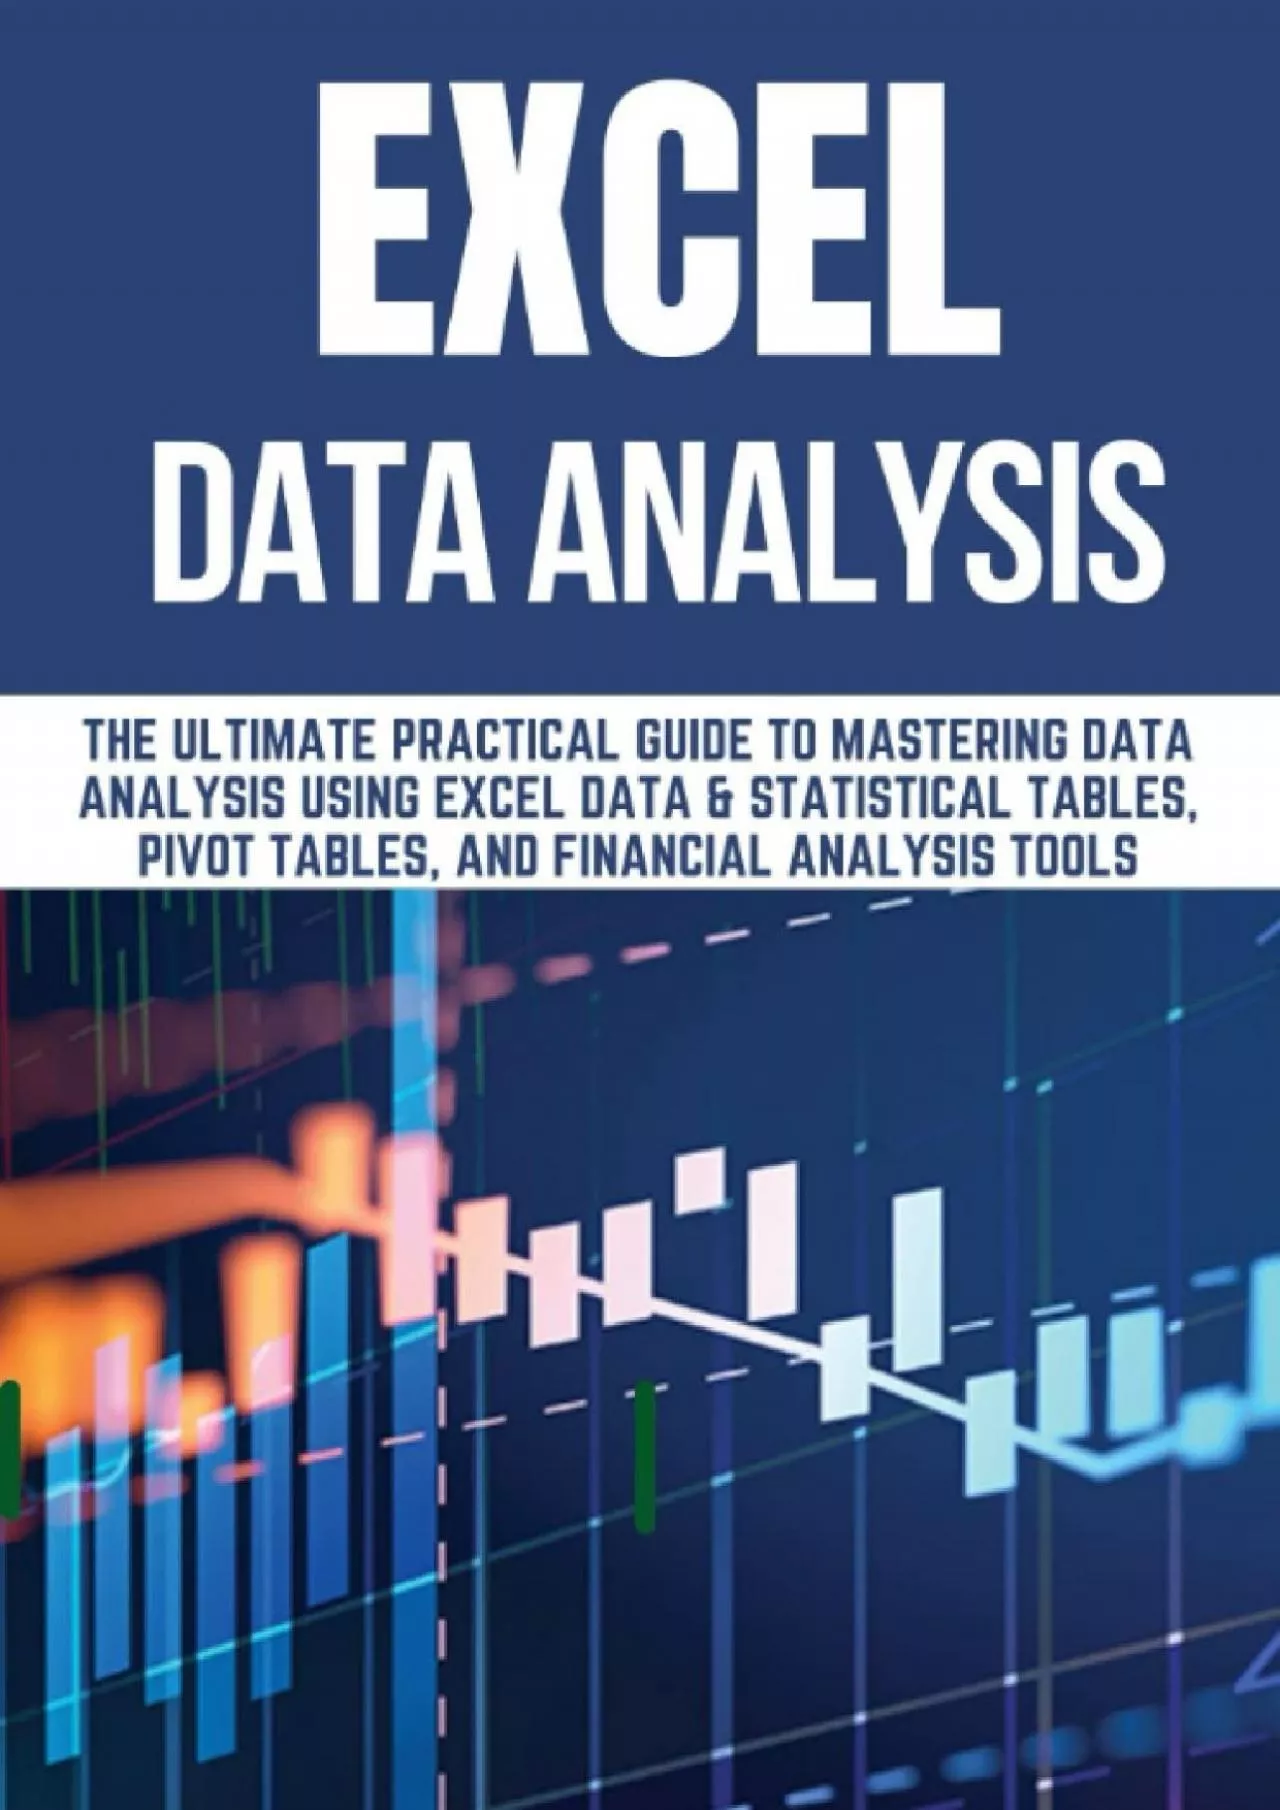 (BOOK)-EXCEL DATA ANALYSIS: THE ULTIMATE PRACTICAL GUIDE TO MASTERING DATA ANALYSIS USING